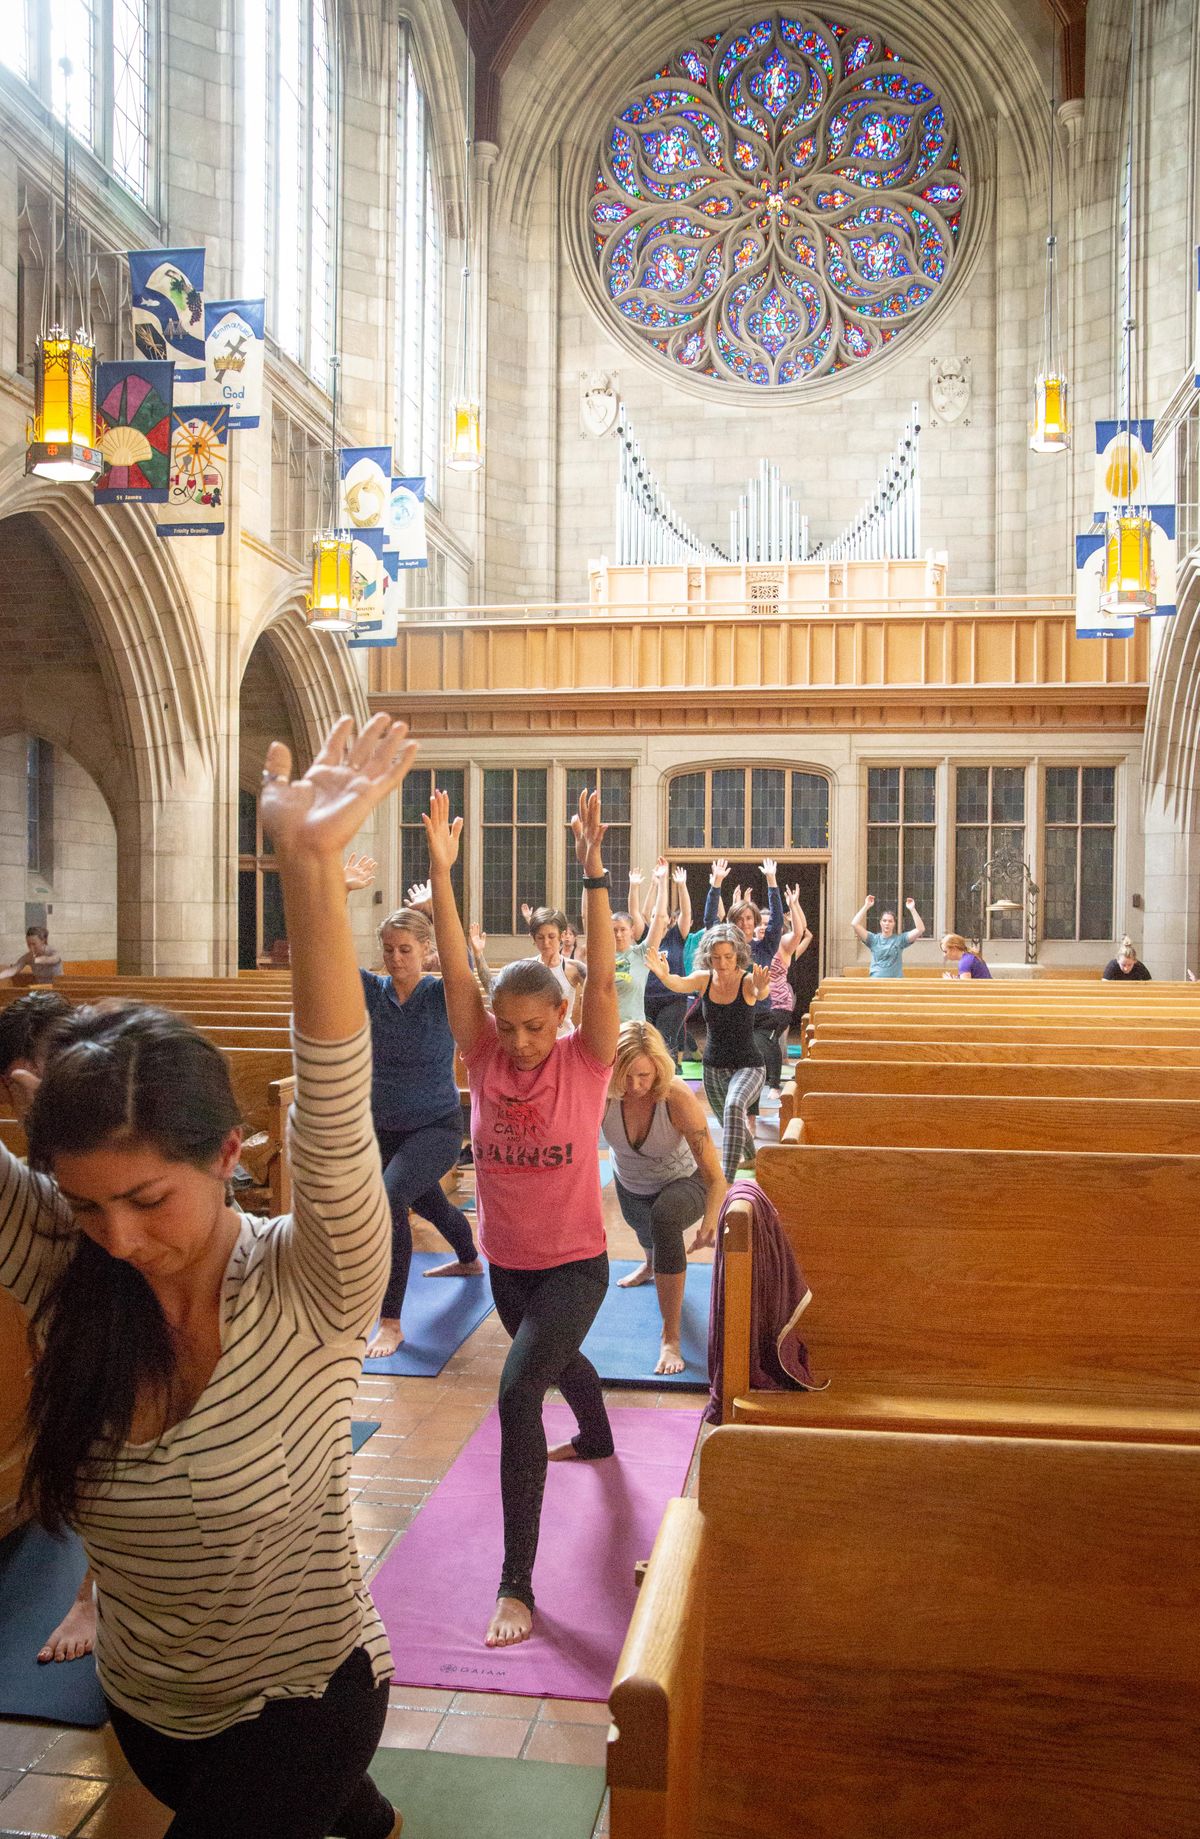 For community and reflection: St. John's Cathedral hosts free yoga